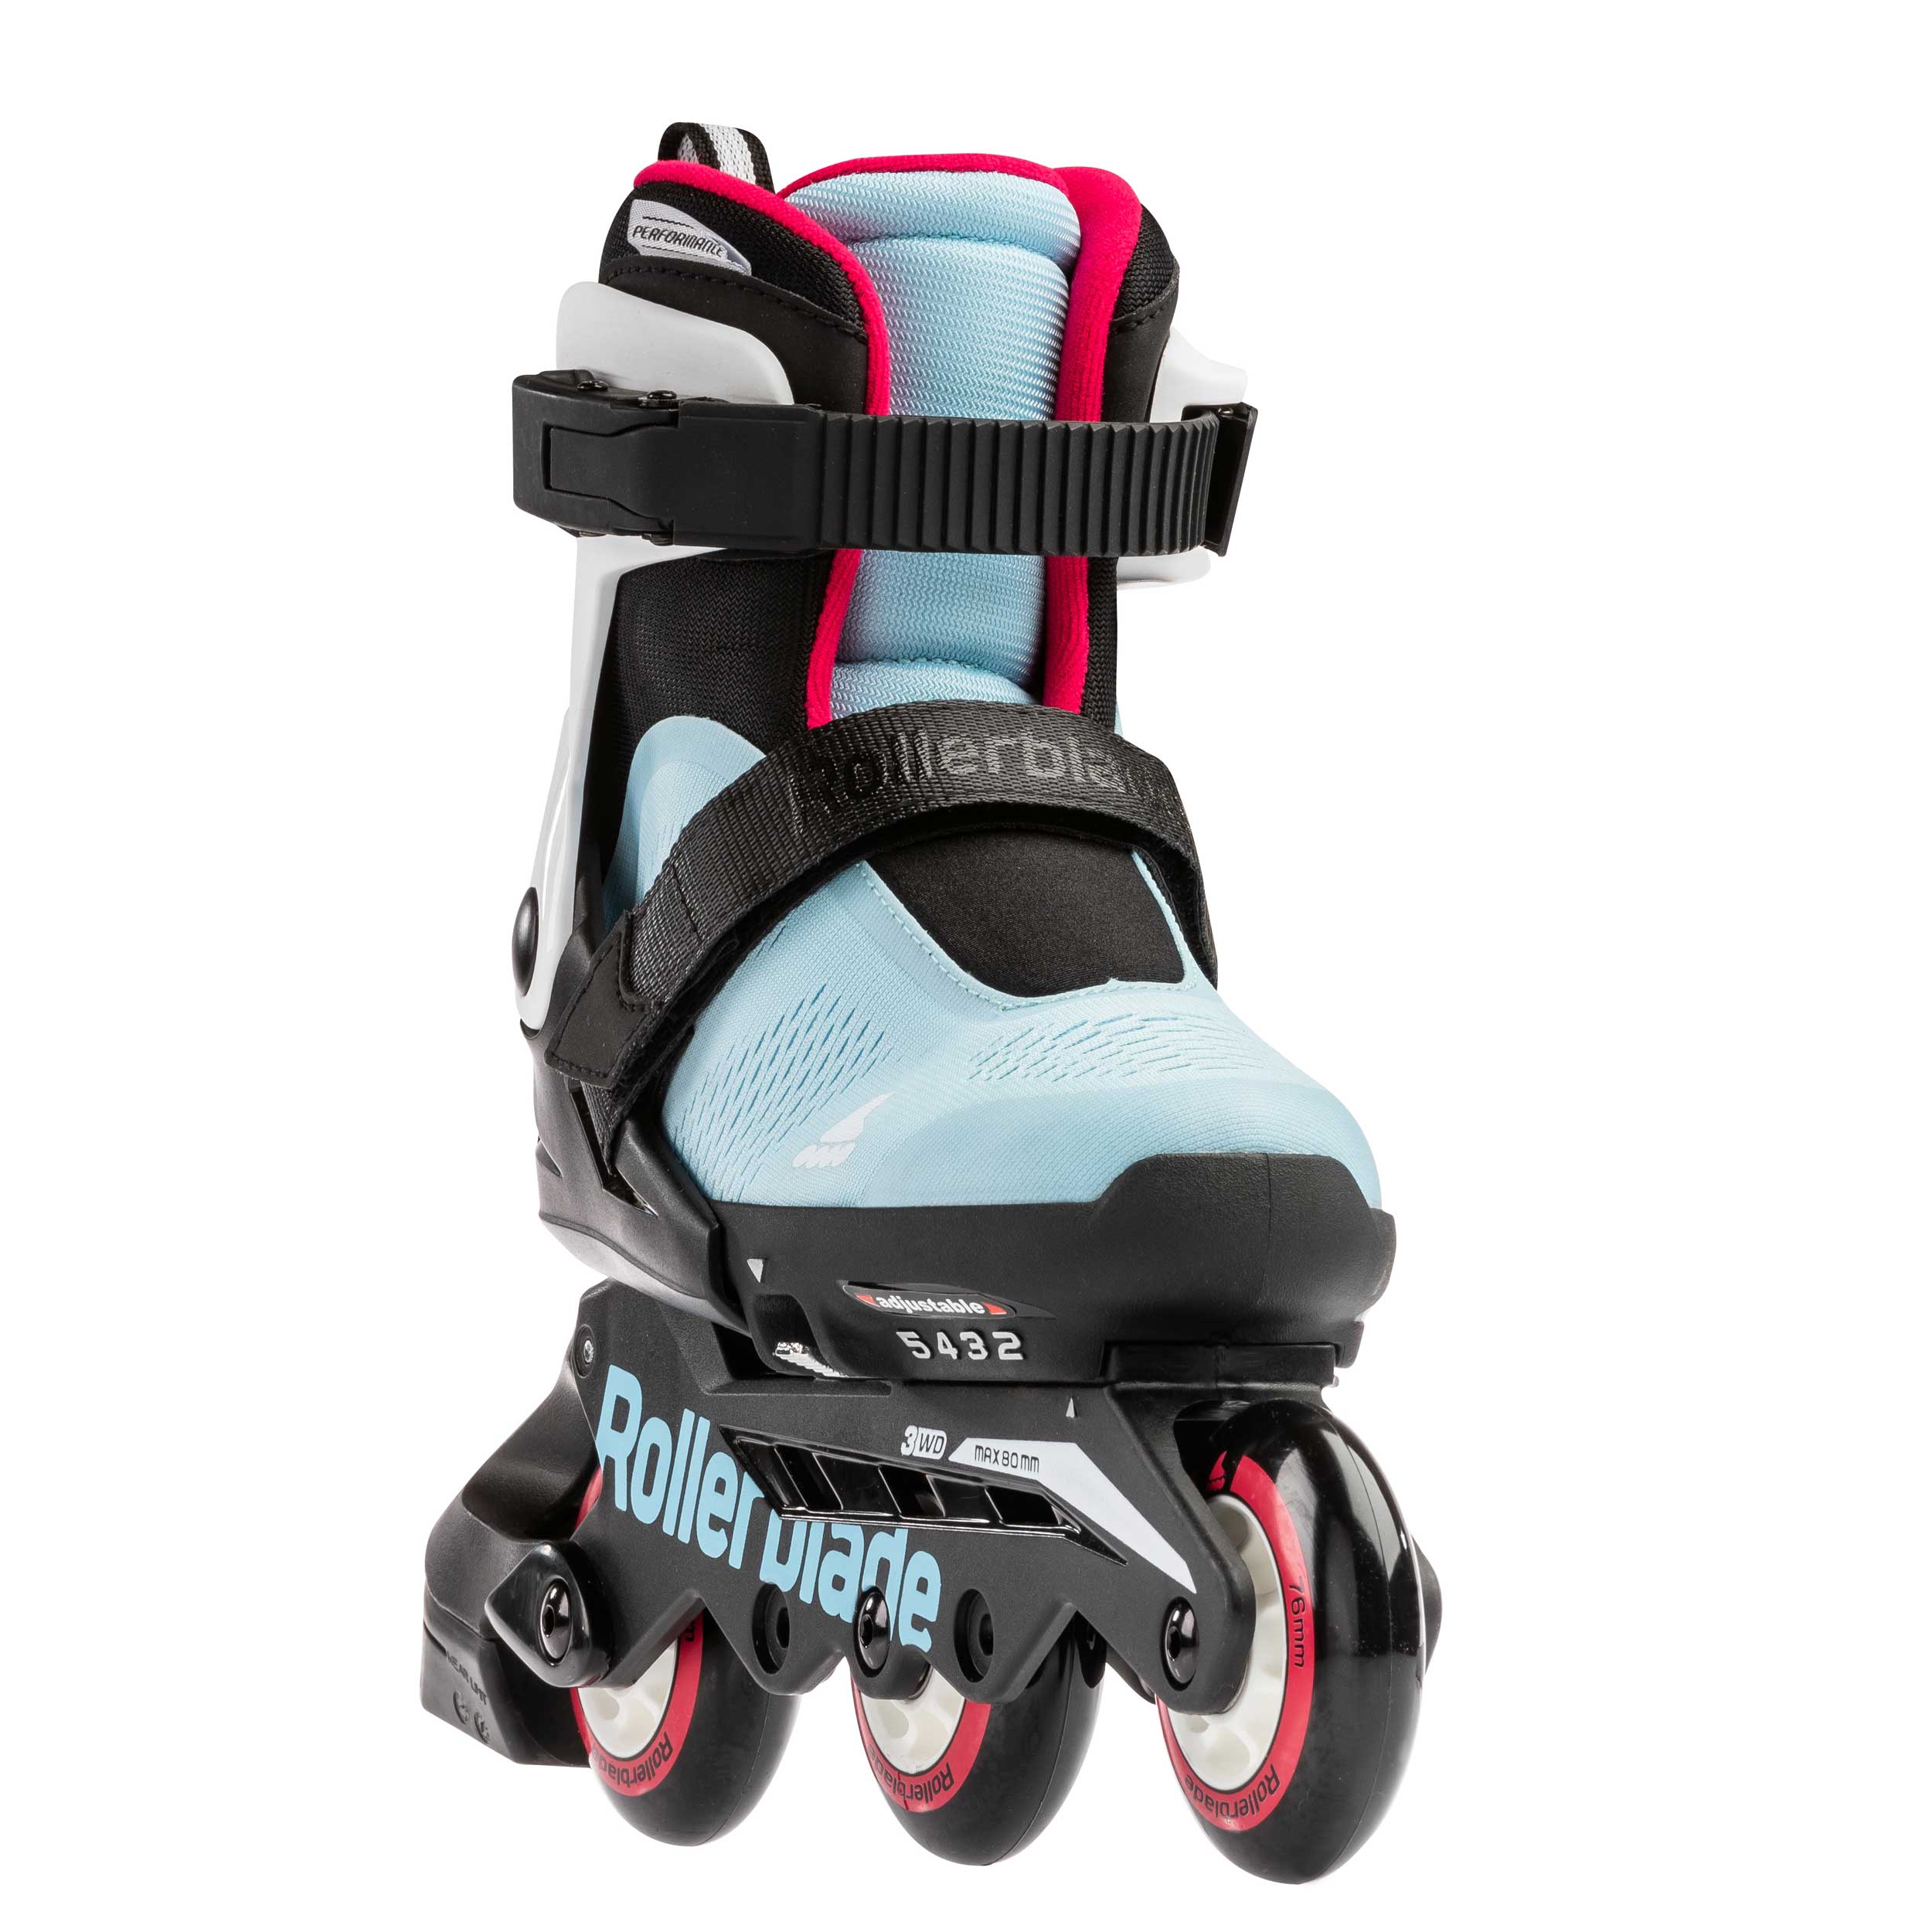 rollerblade-microblade-3wd-skates-front-view